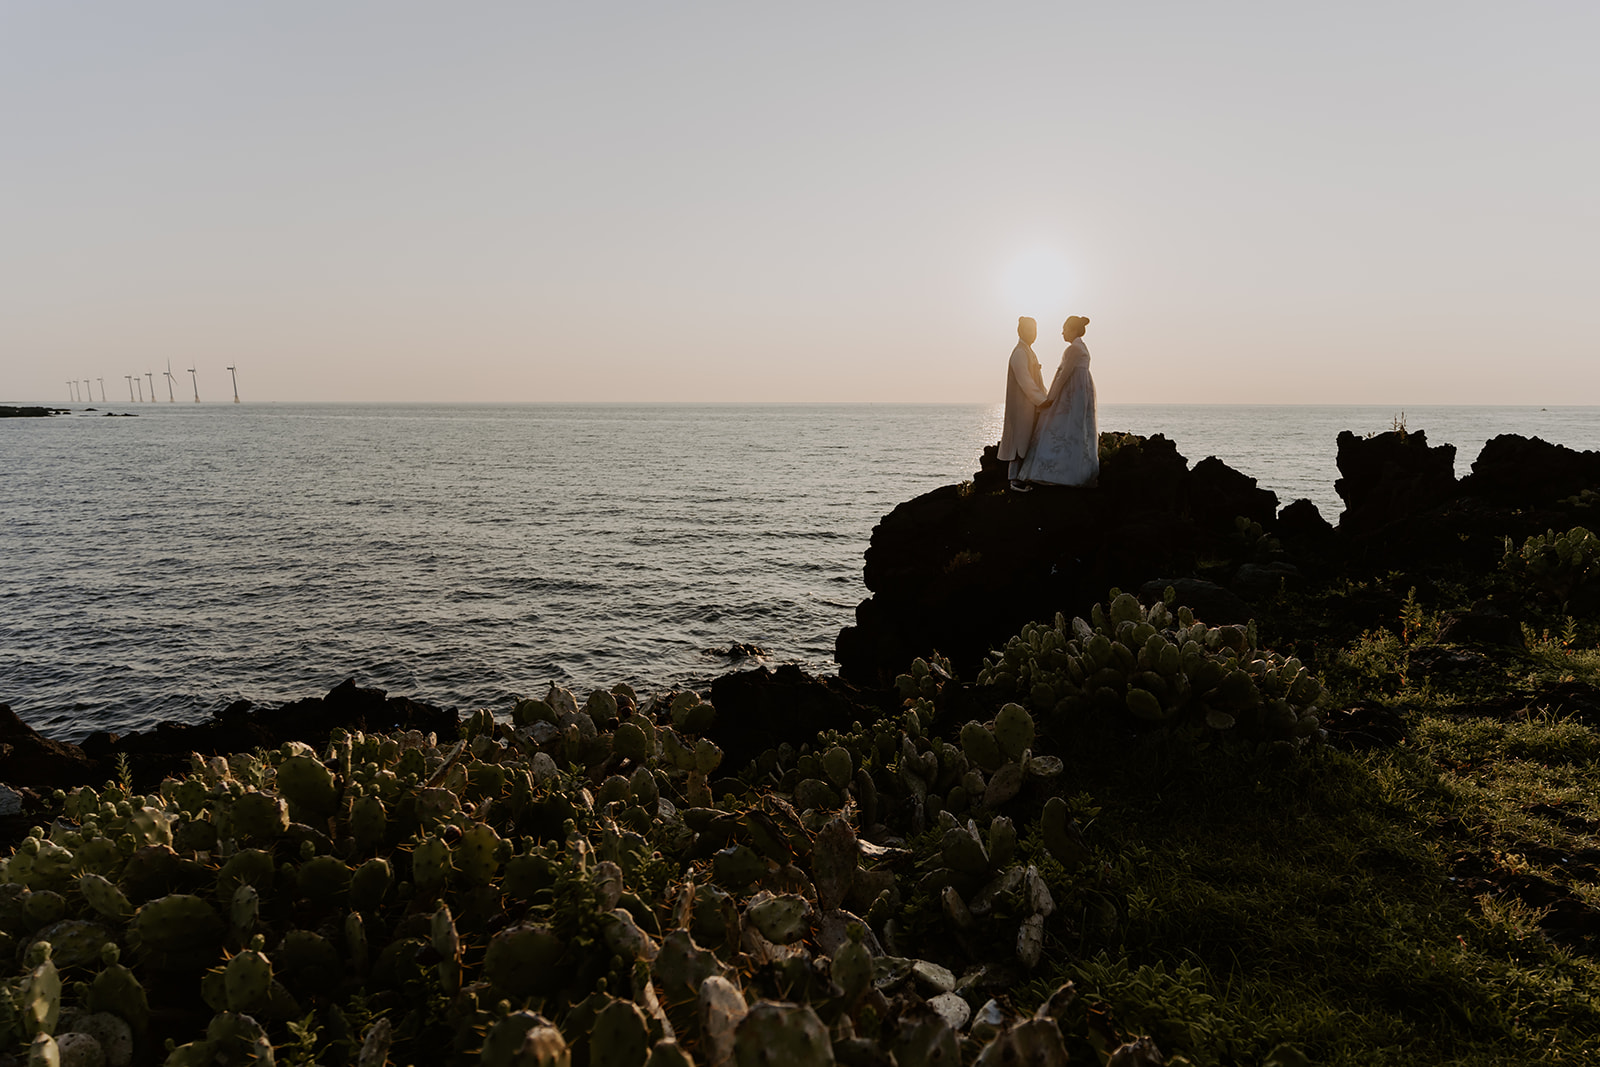 A pre-wedding couple standing on top of a cliff overlooking the ocean in Korea.